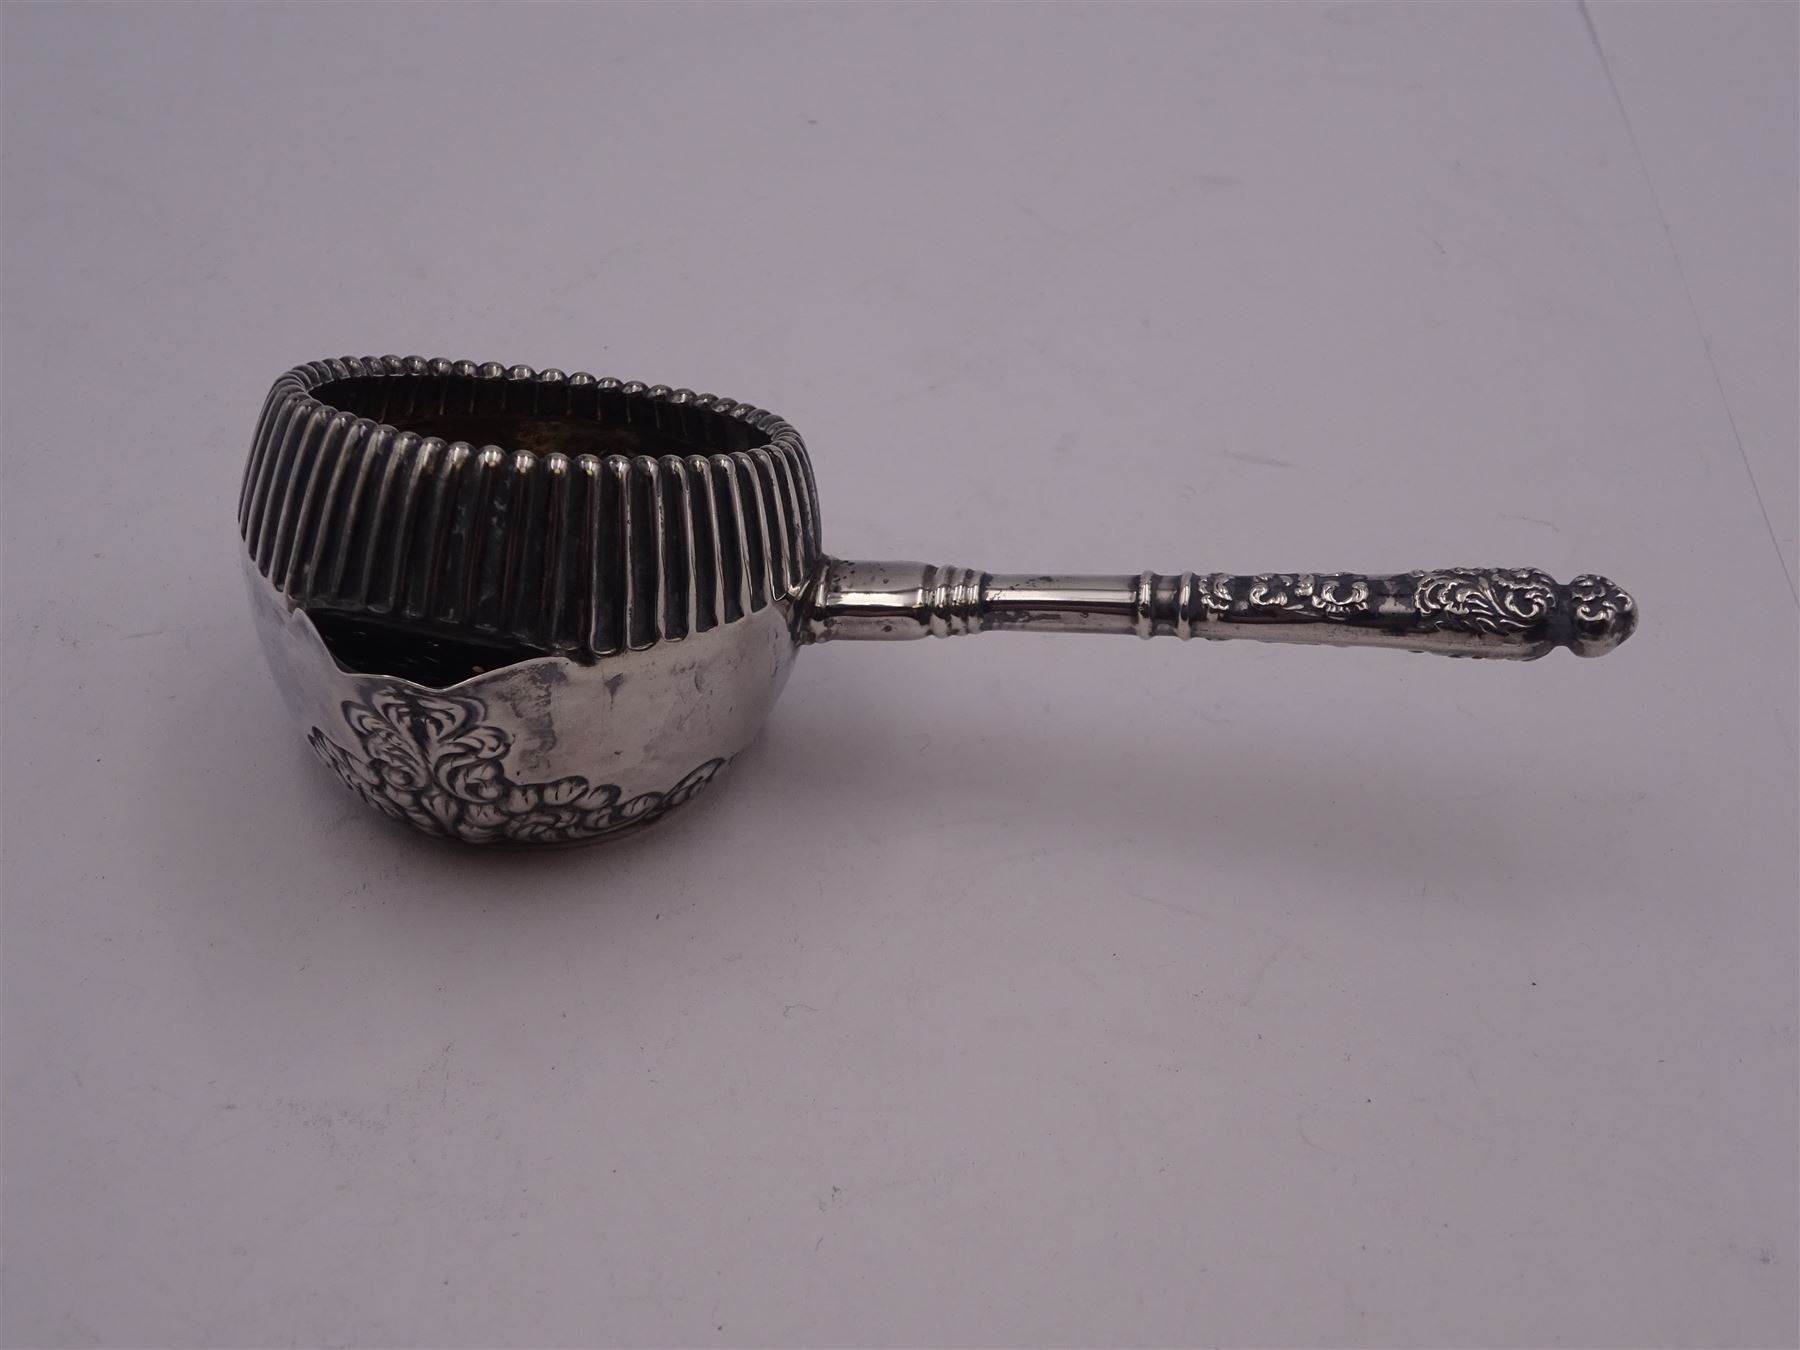 Late 19th century American silver strainer - Image 2 of 9